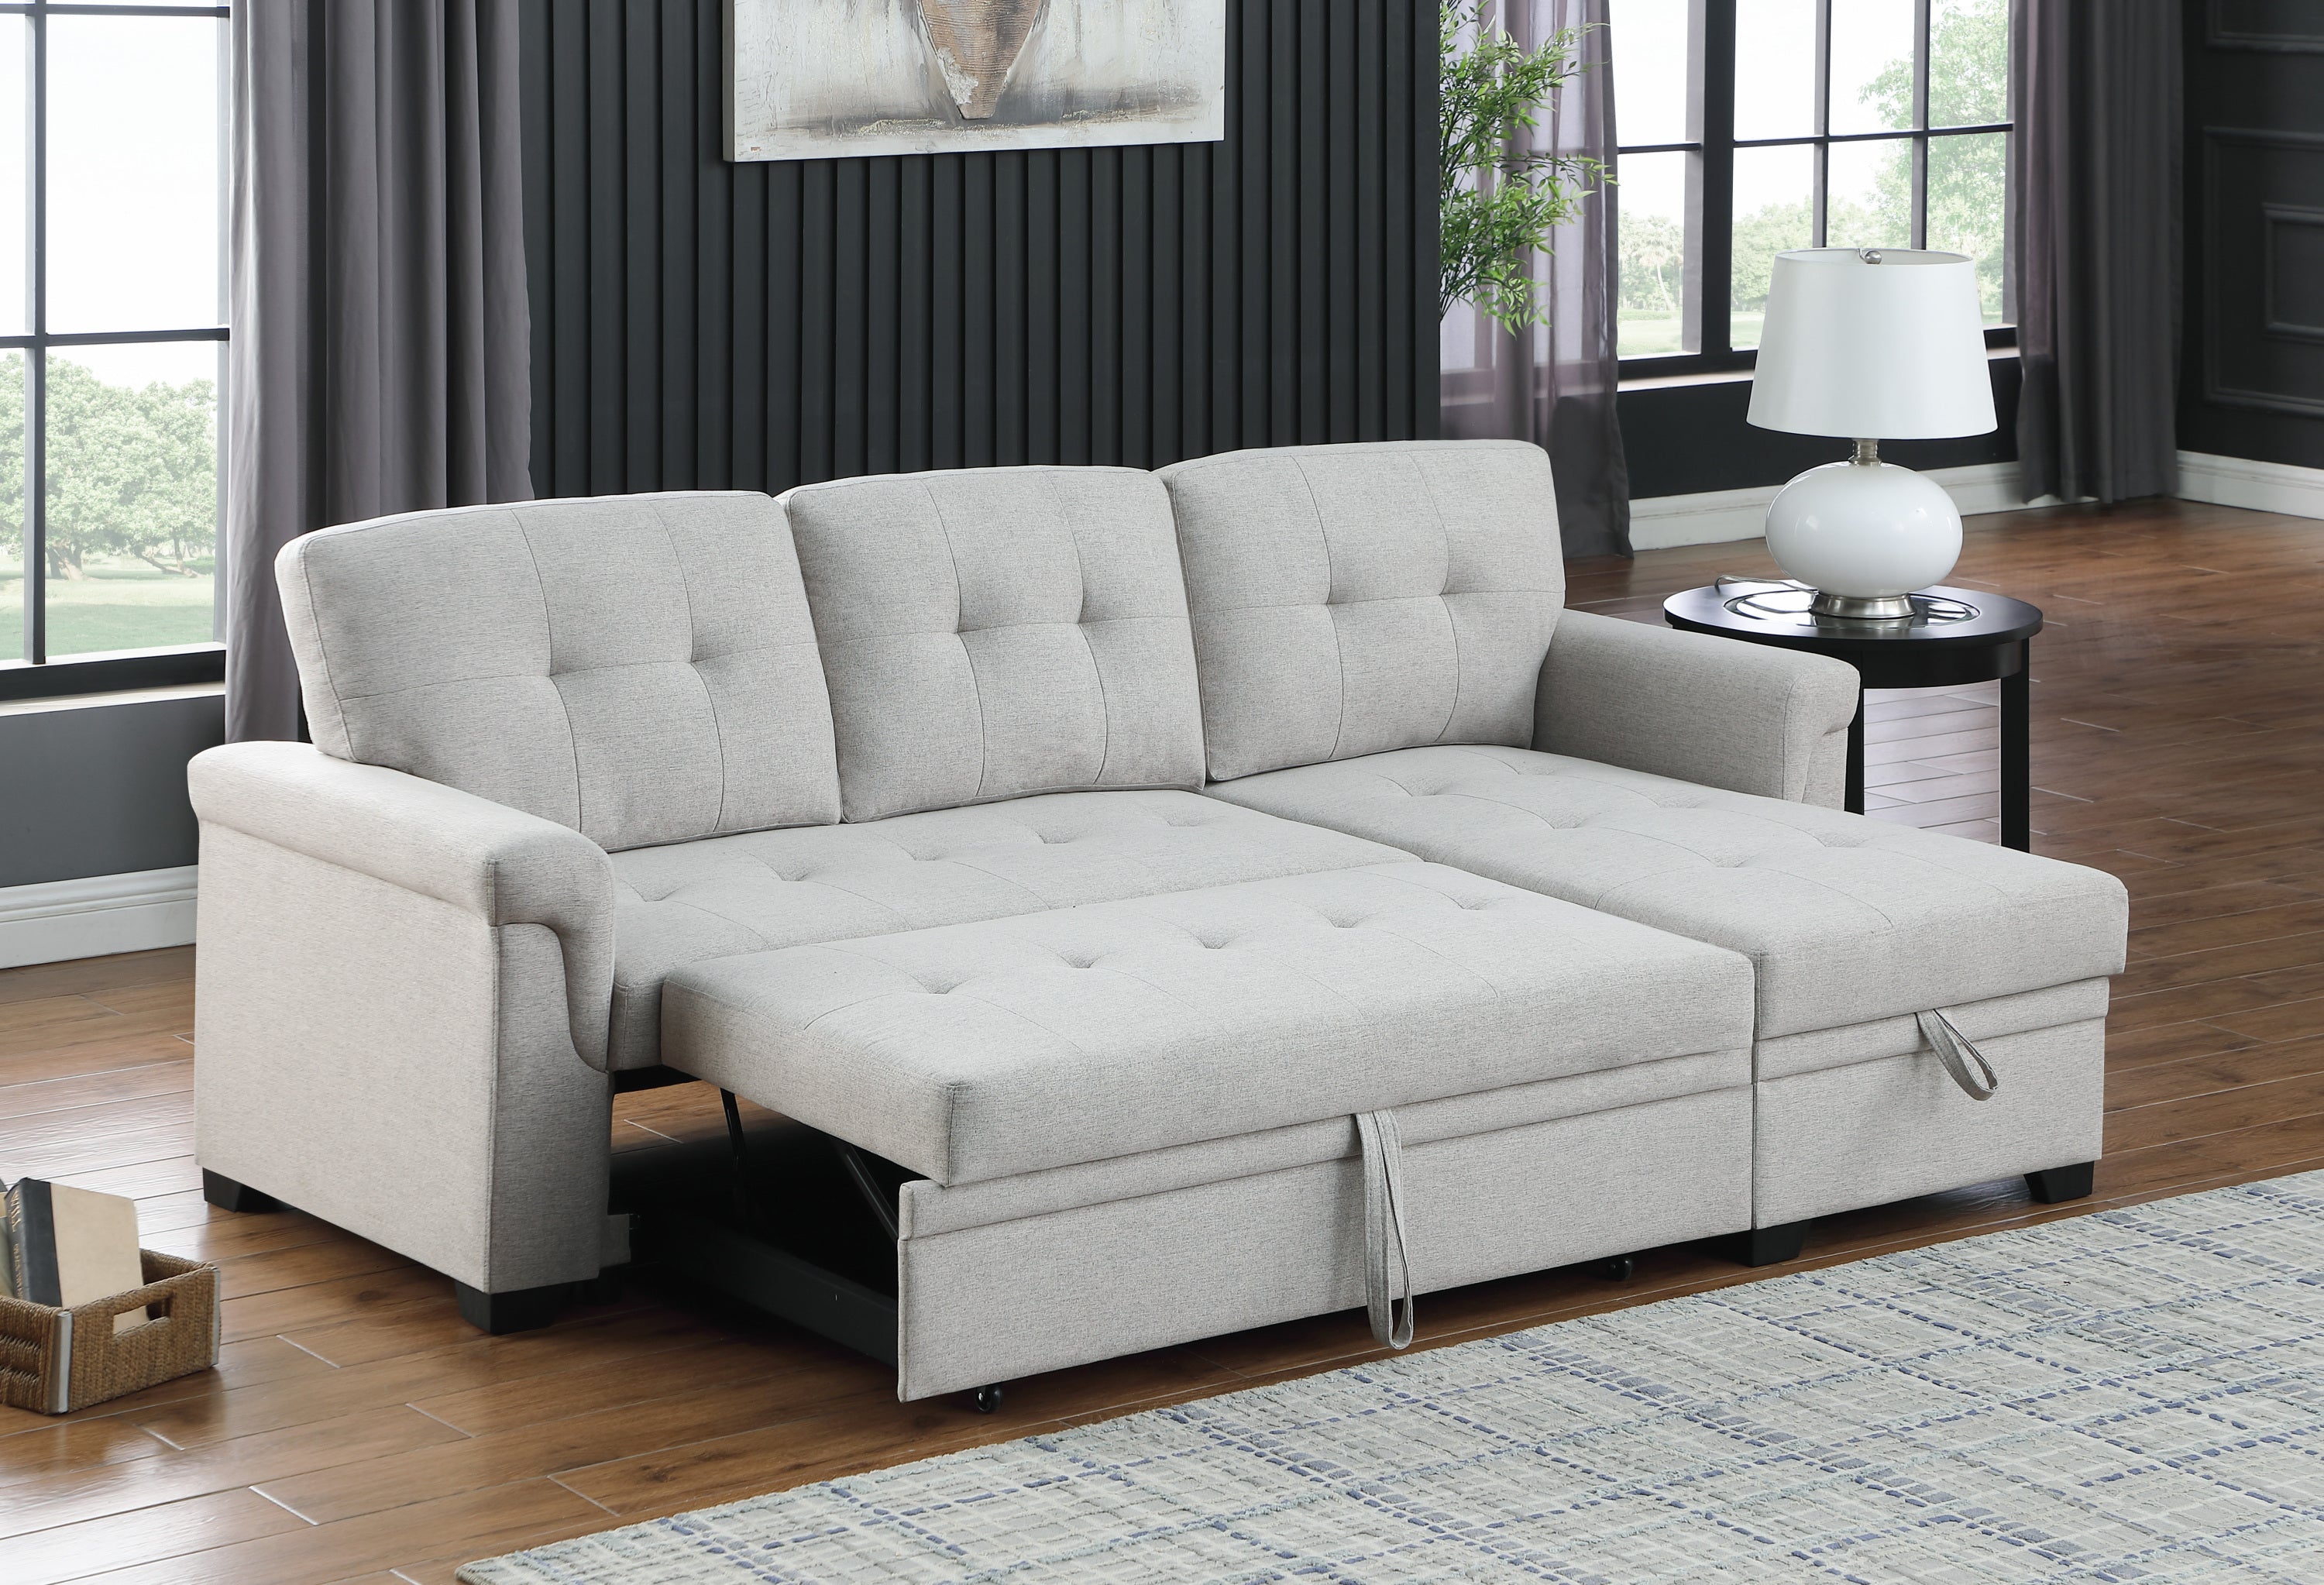 Lucca 84" Light Gray Linen Reversible Sleeper Sectional Sofa with Storage Chaise | Stylish and Functional Addition to Your Living Space